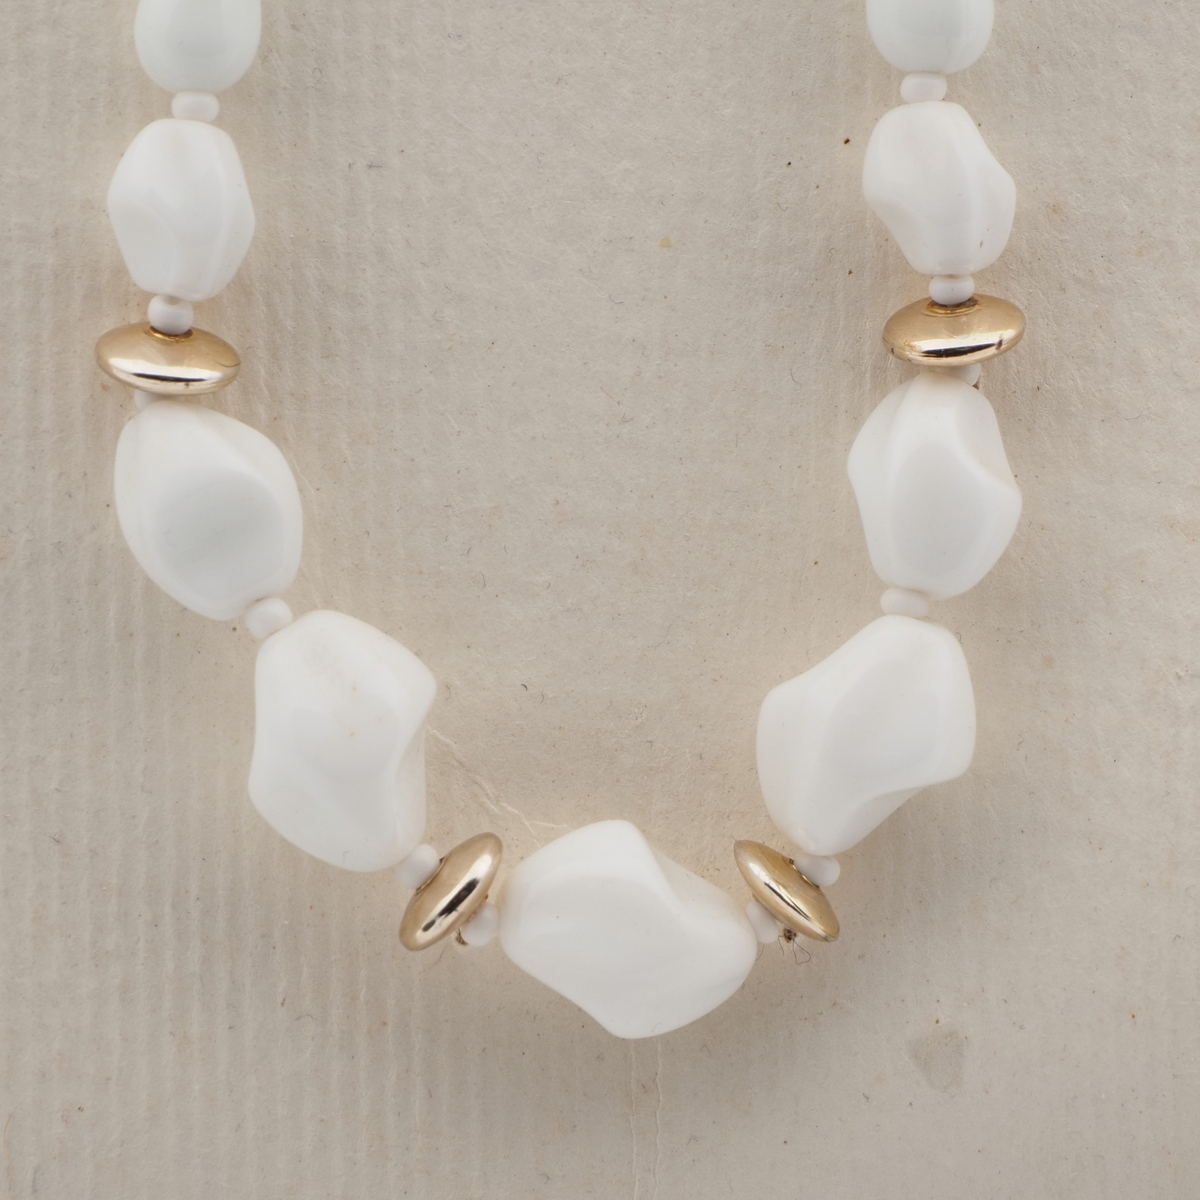 Vintage Czech necklace white round teardrop nugget glass beads